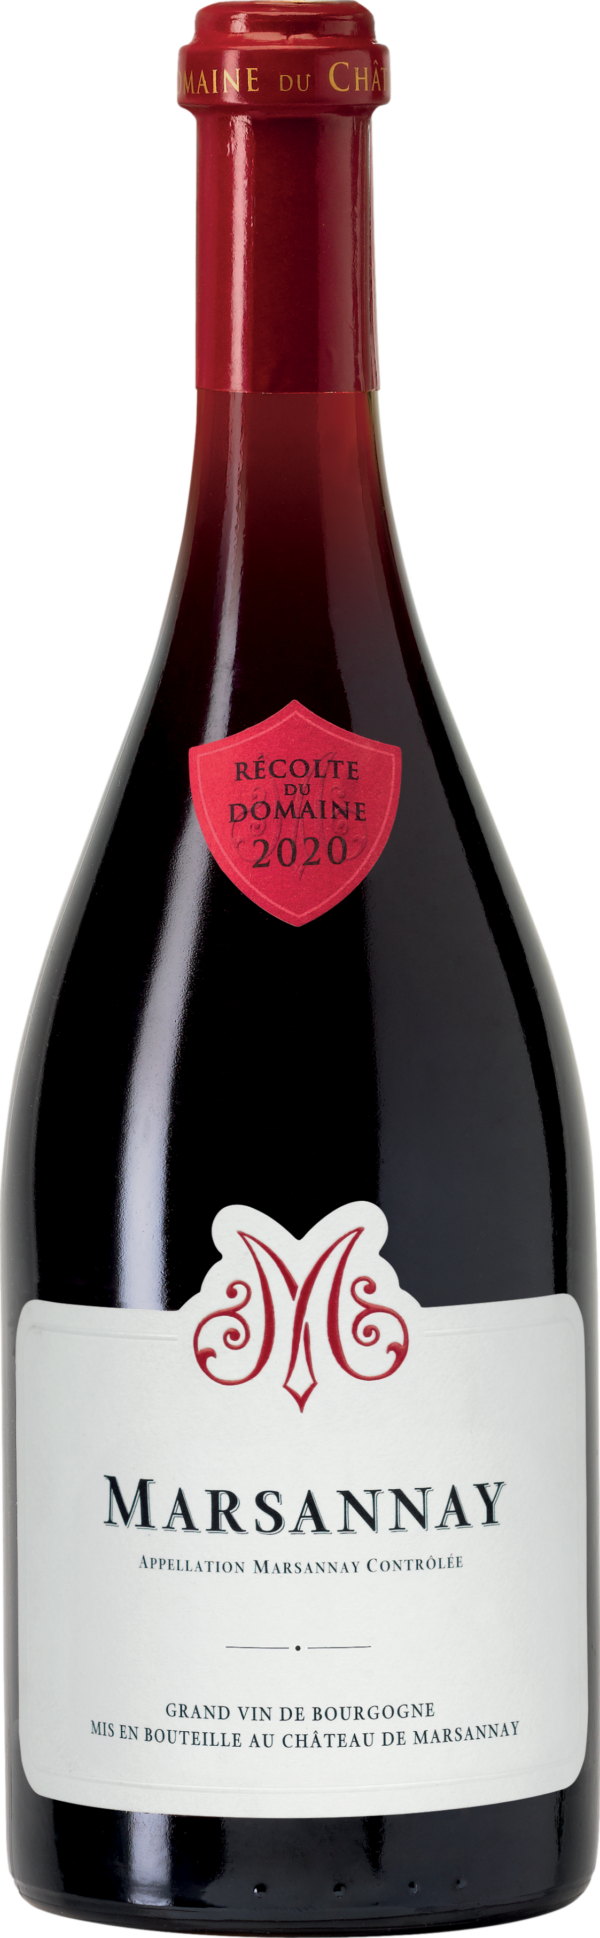 Product image of Chateau de Marsannay Rouge 2020 from 8wines